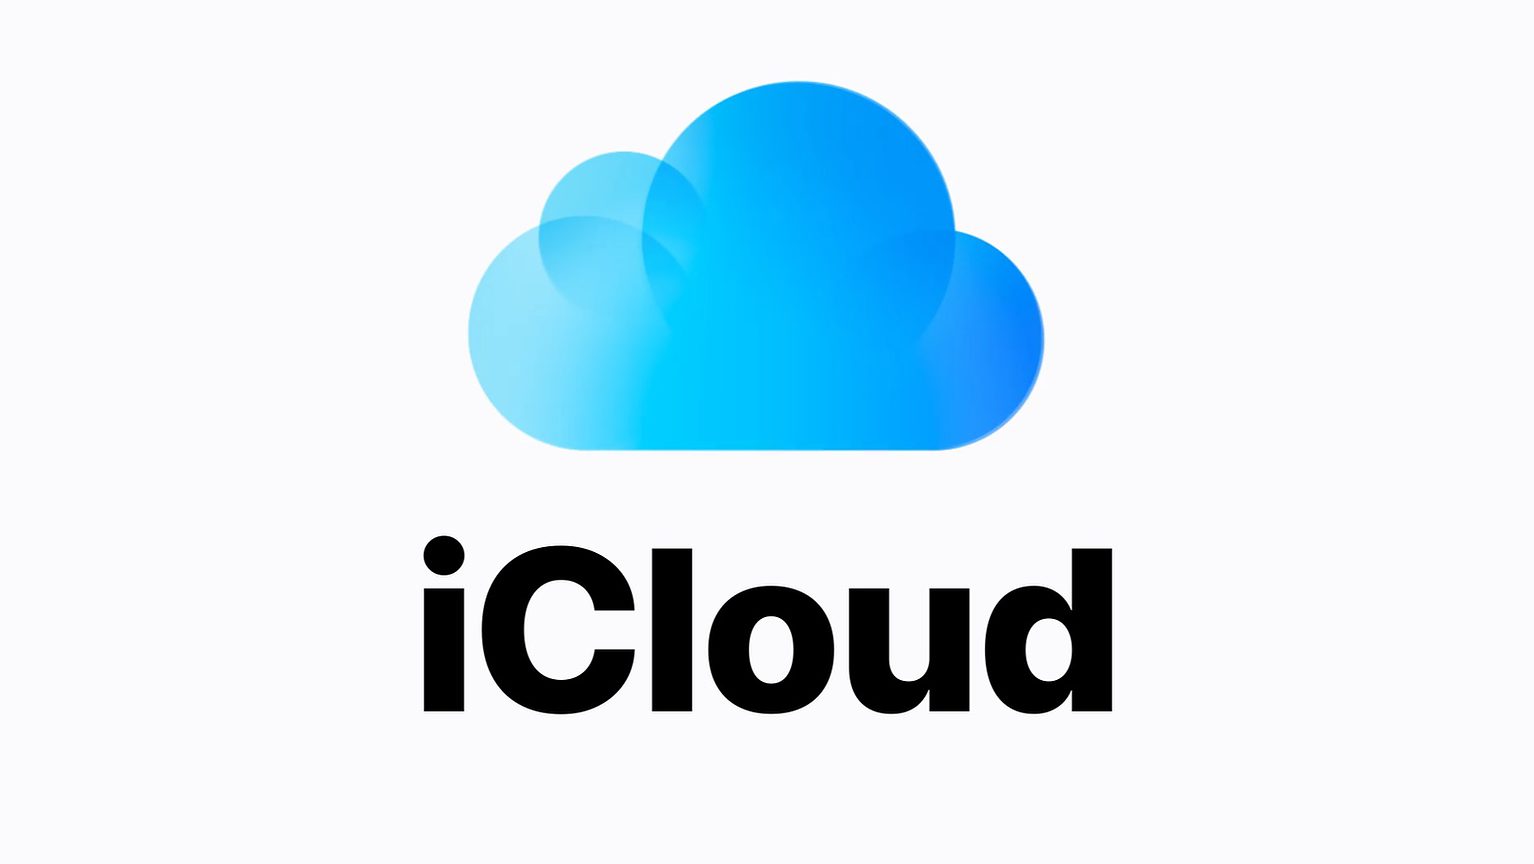 Apple drops controversial plan to scan iCloud Photos for CSAM